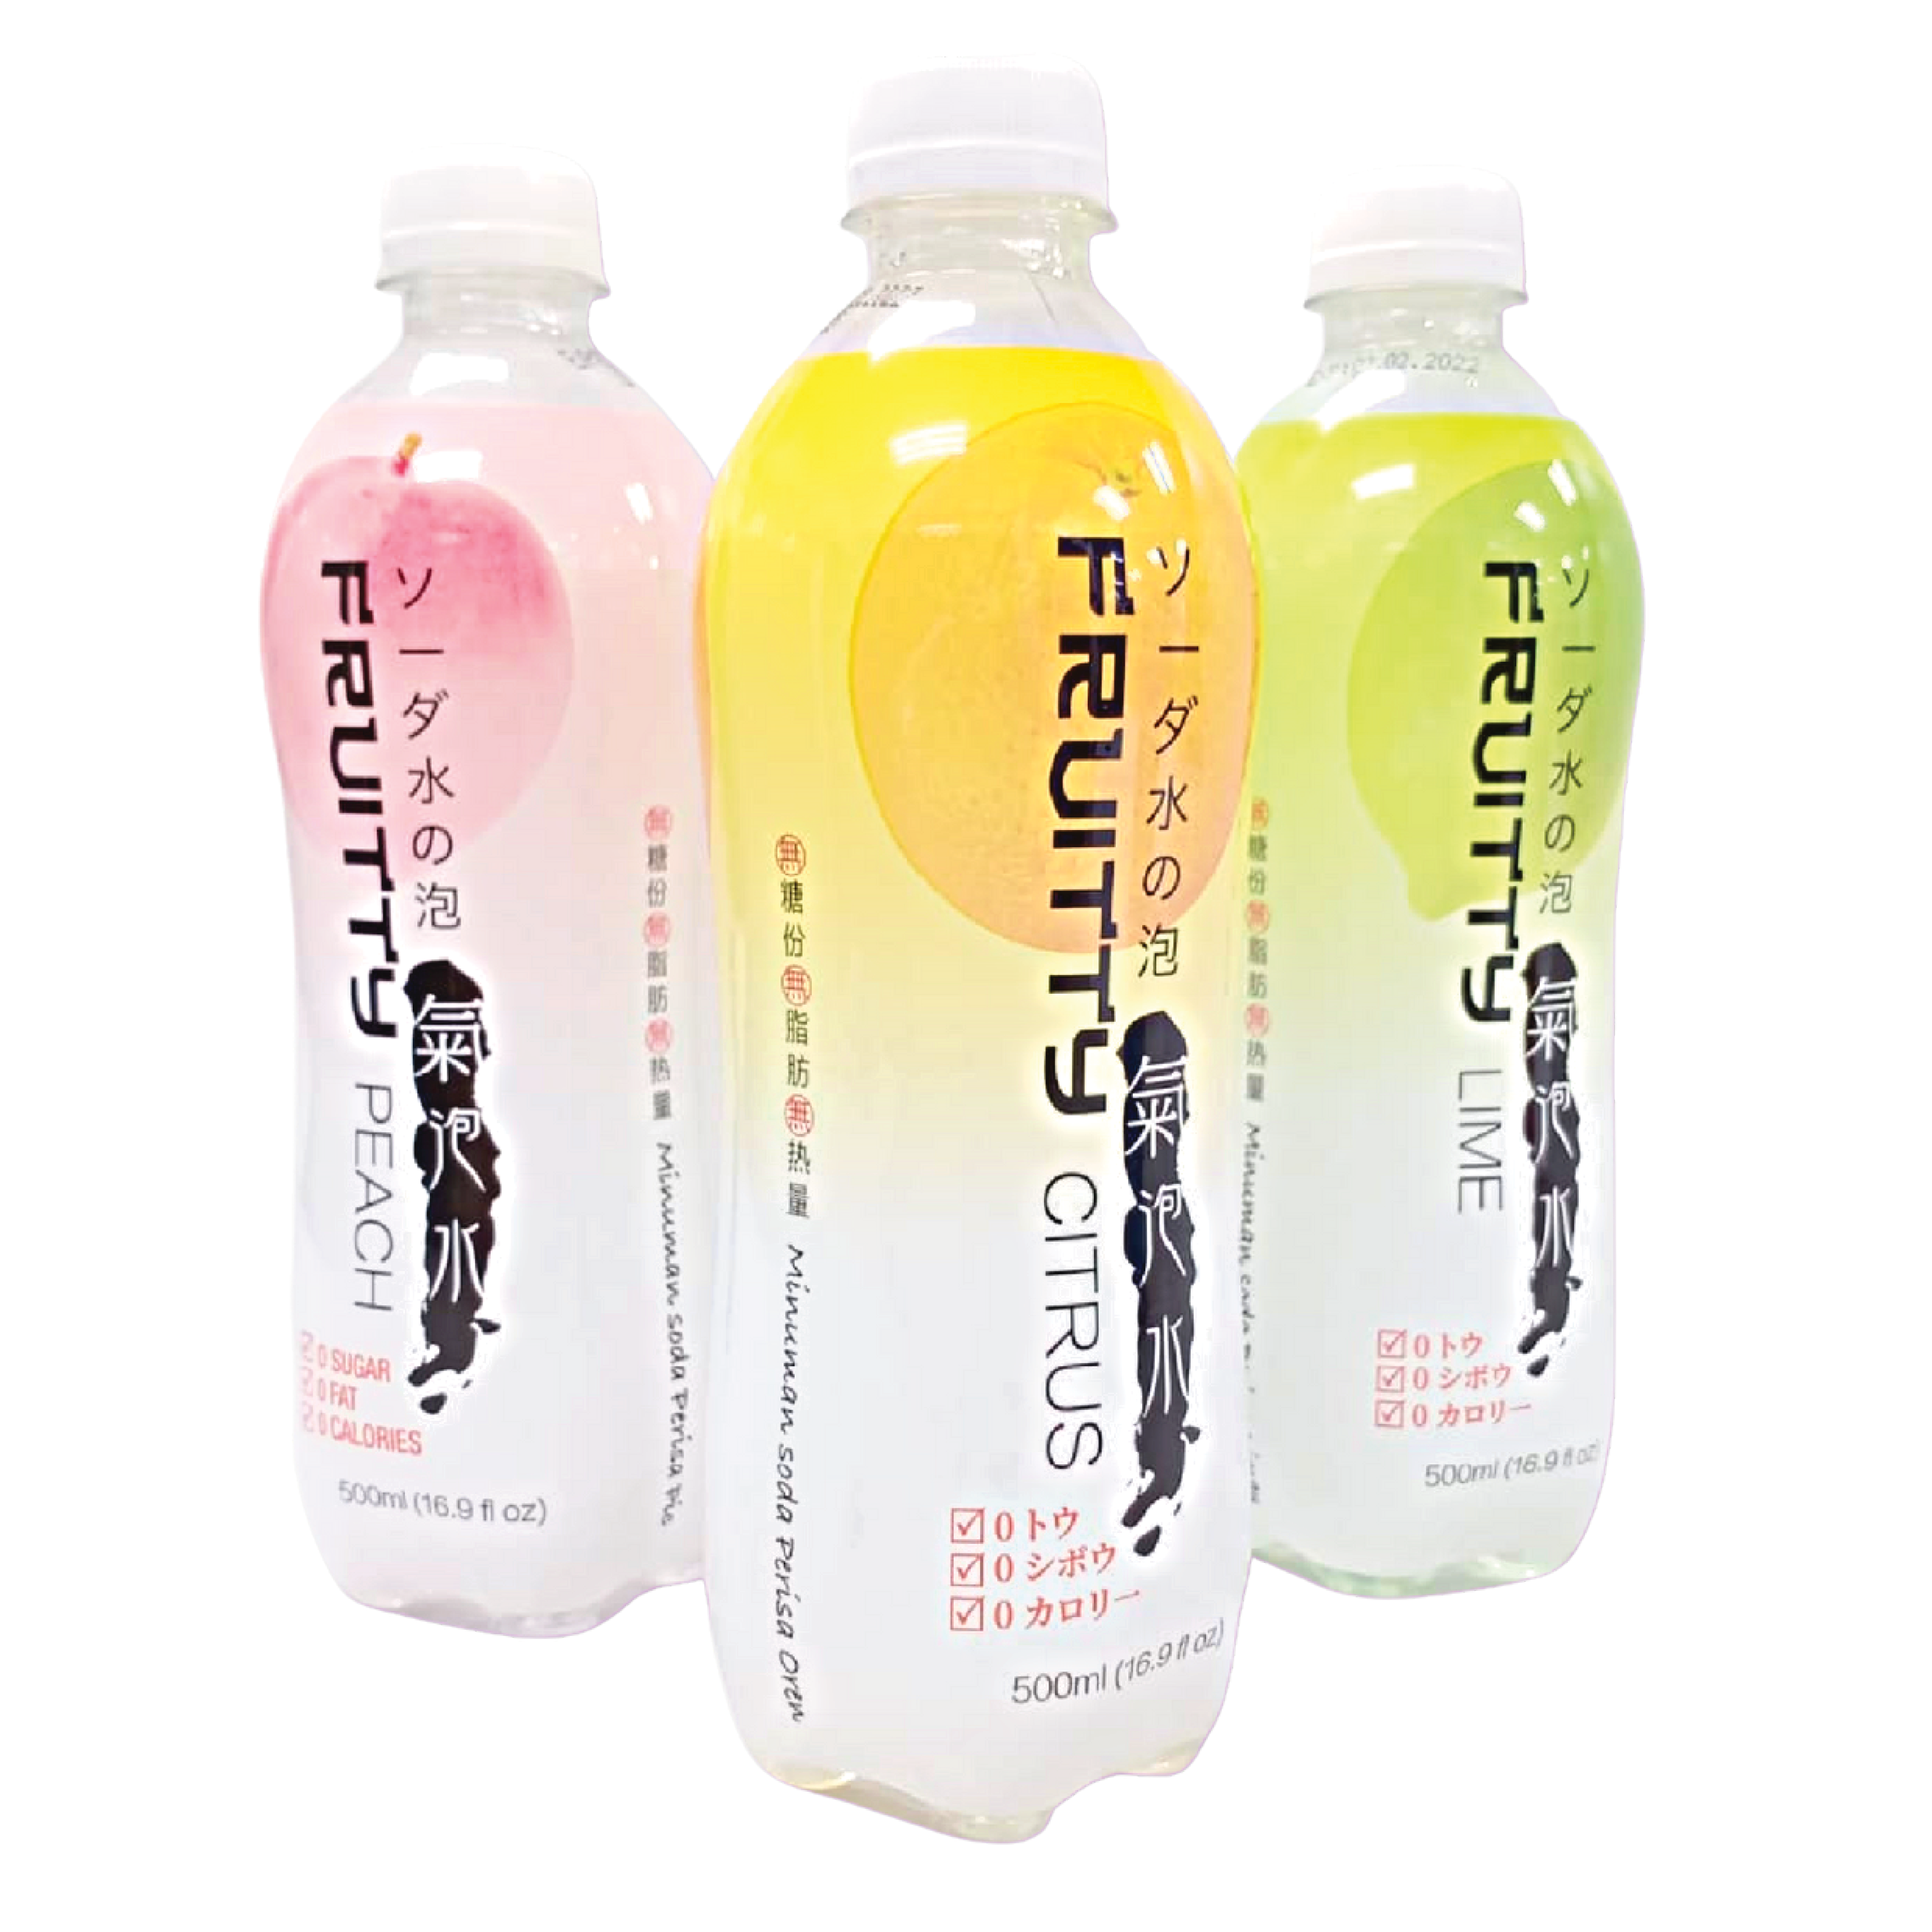 Pere Ocean Fruitty Sparkling Soda Flavoured Water 500ml available in three flavours - peach, lime & citrus